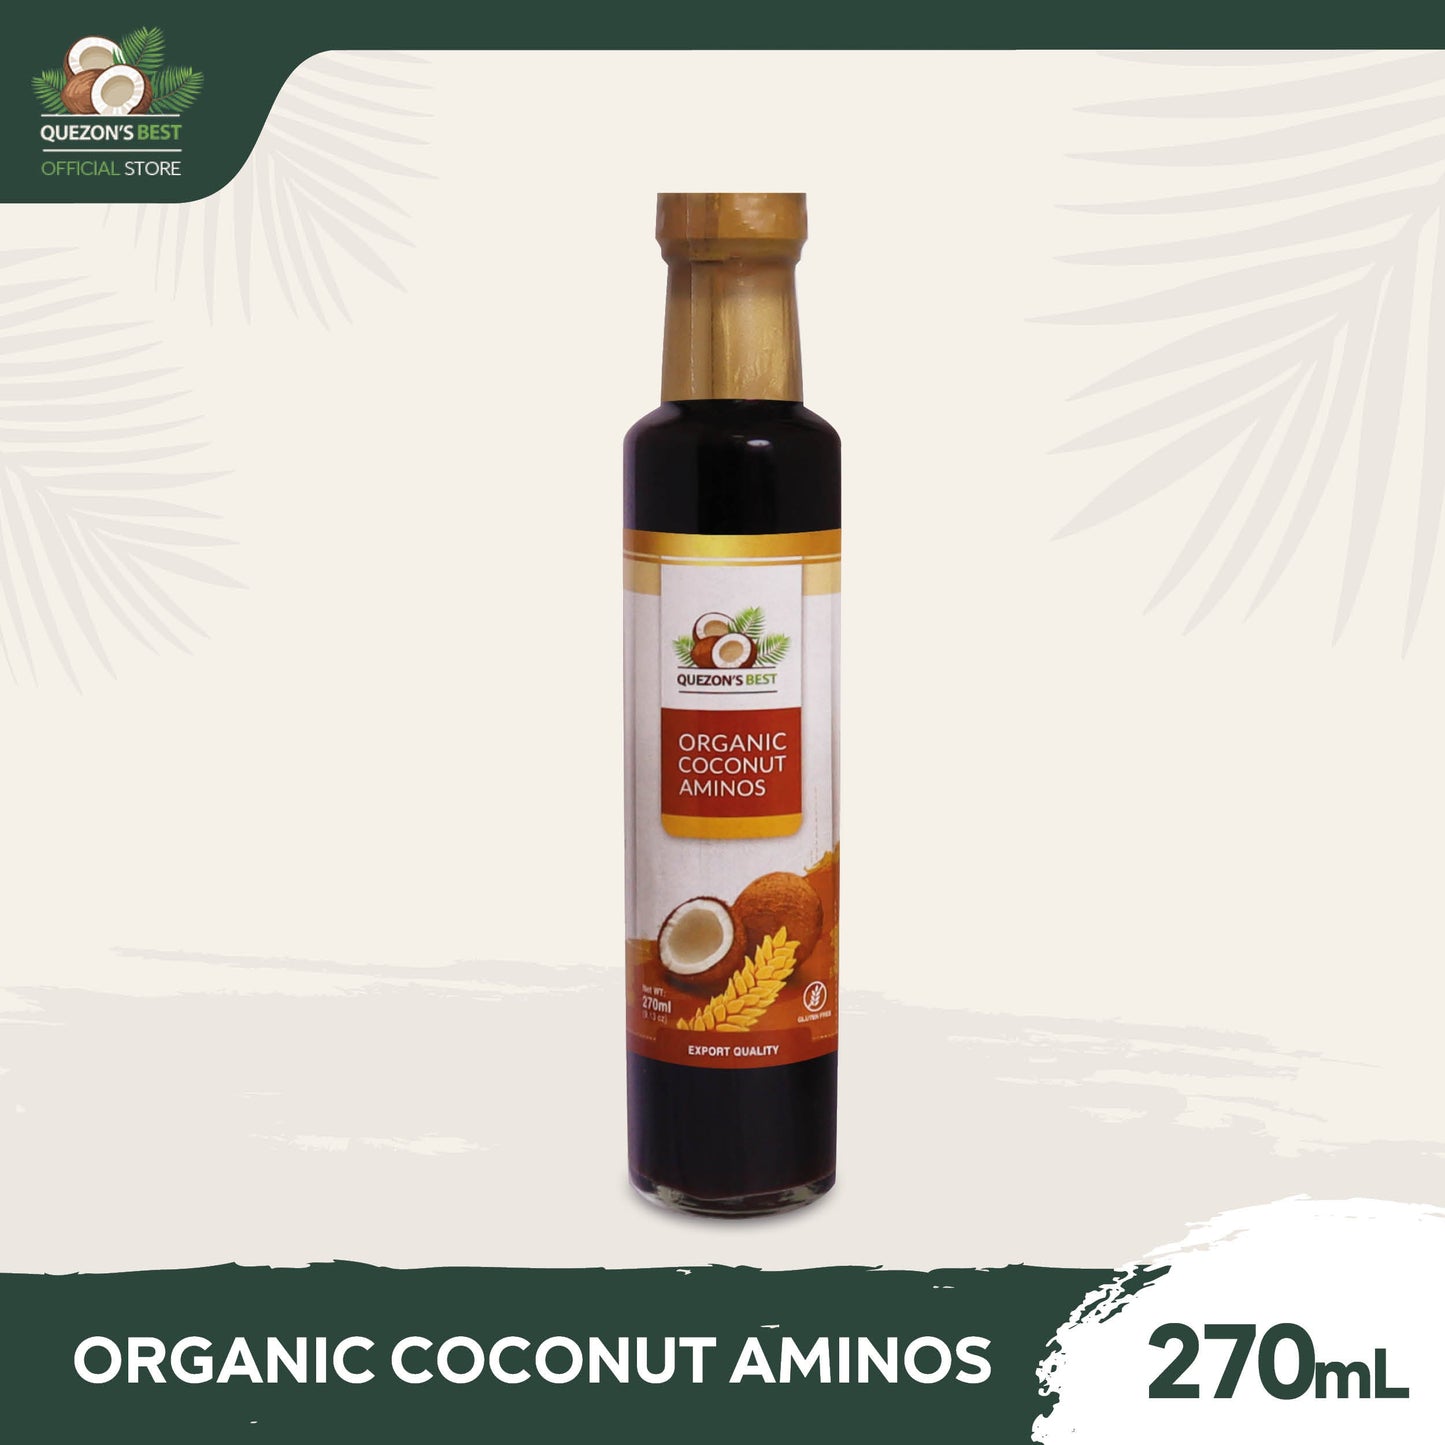 [CLEARANCE] Quezon's Best Organic Coconut Aminos 270mL